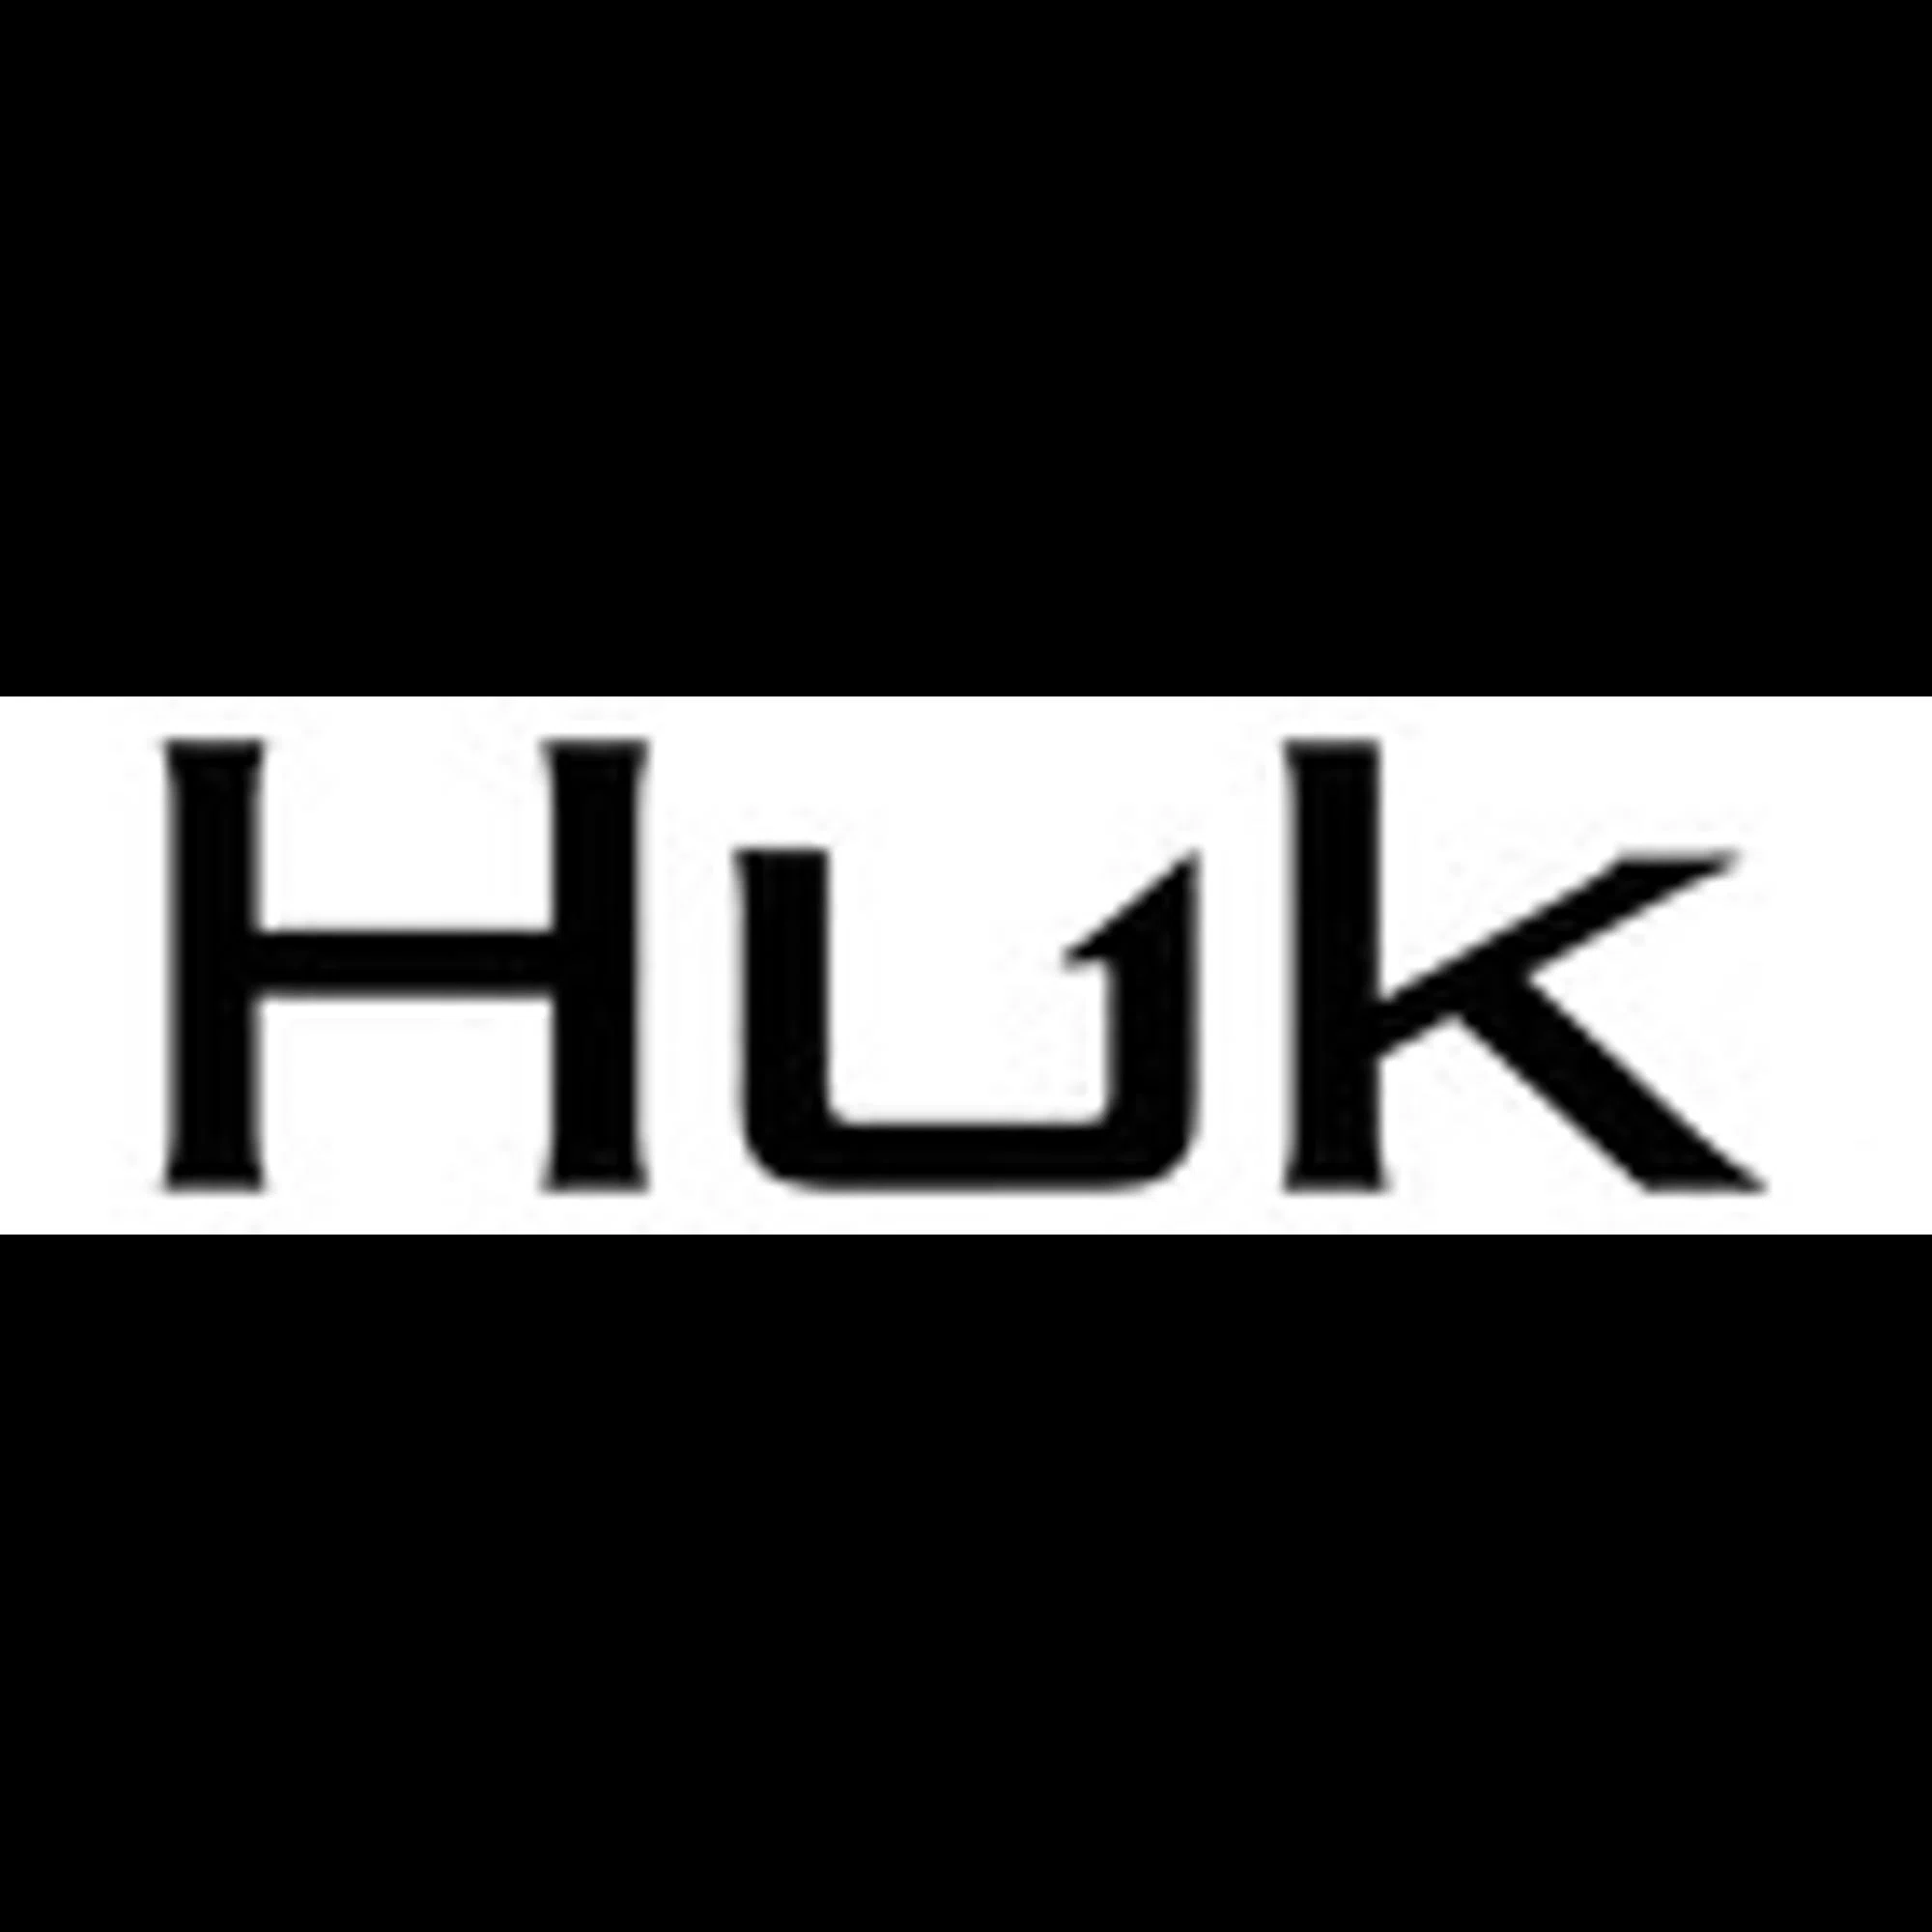 Does Huk Gear offer a military discount? — Knoji